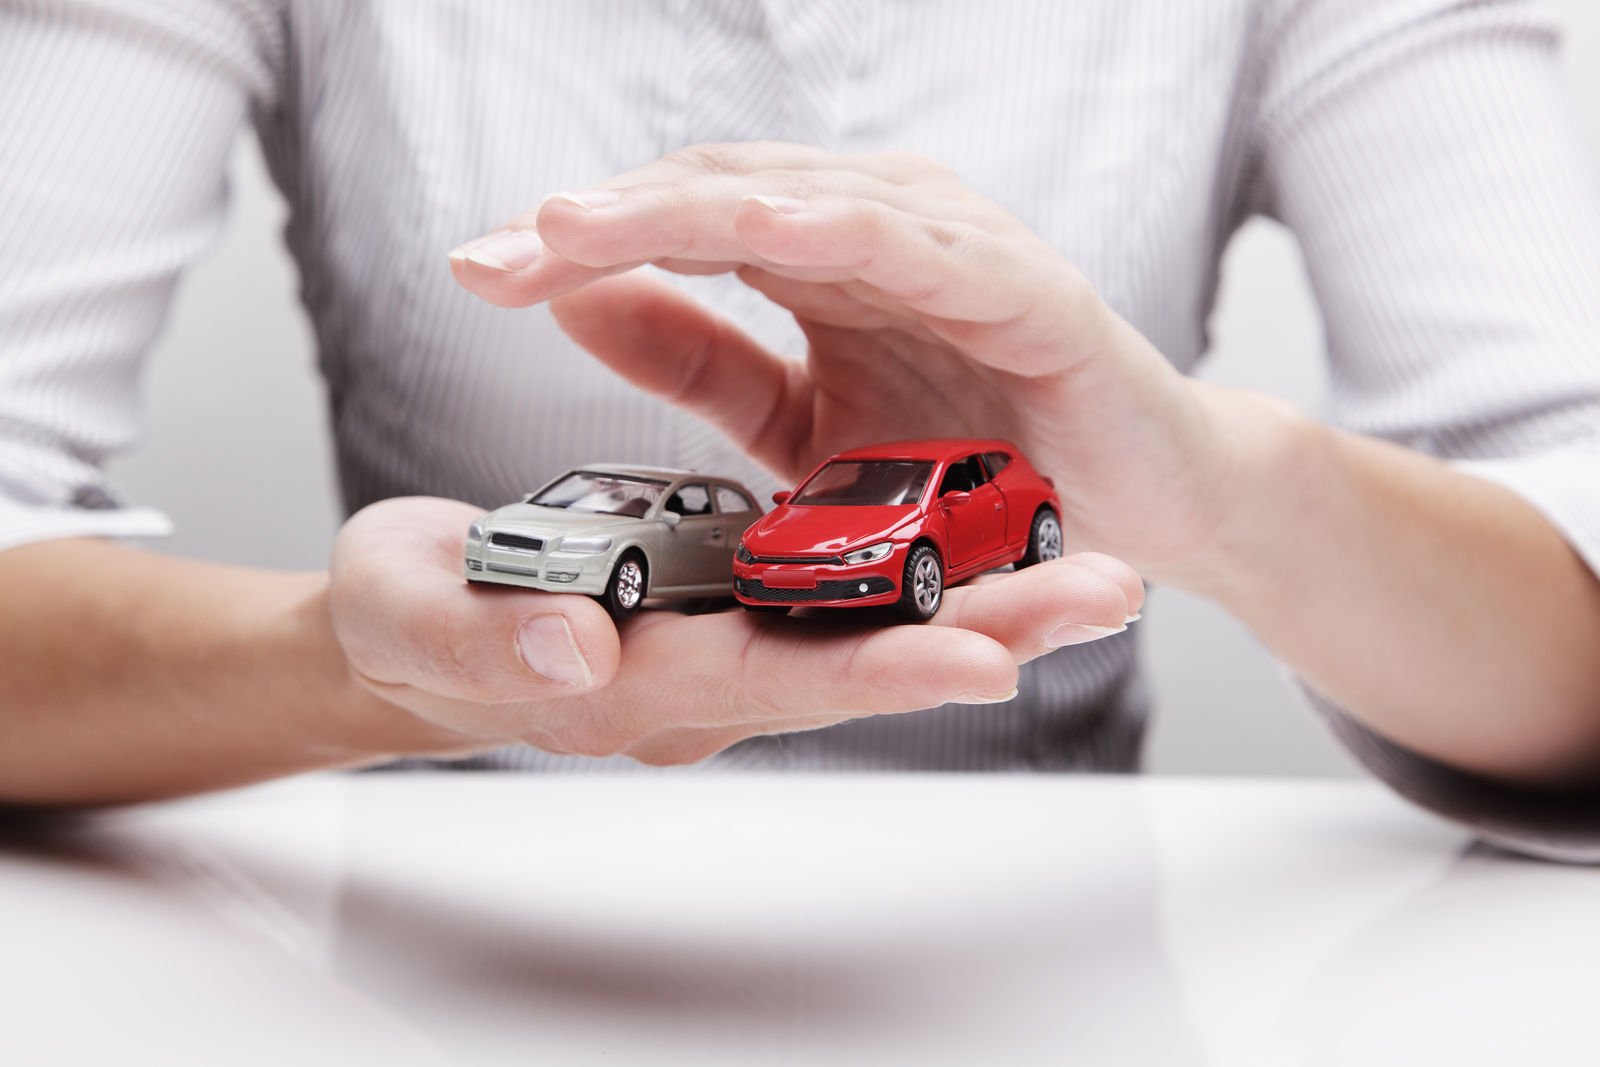 Do car insurance companies check your driving records?